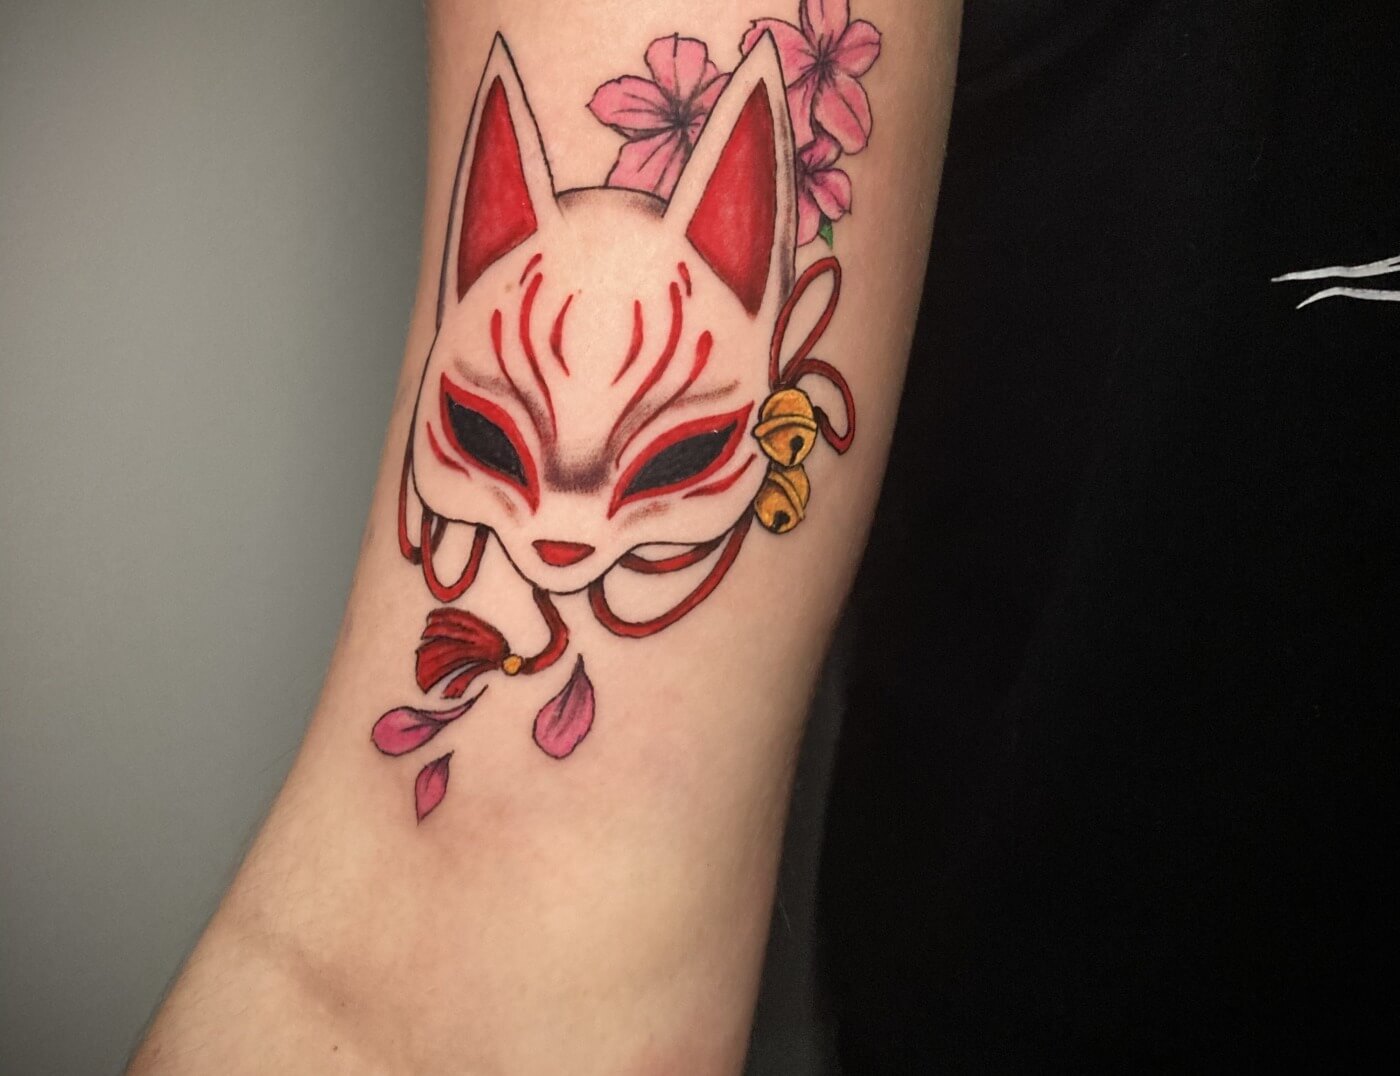 "Kitsune No Yomeiri," Kitsune Fox Mask Tattoo by Funk Tha World at Iron Palm Tattoos in downtown Atlanta, GA. Kitsune no yomeiri, or the fox's wedding, is a popular folktale in Japan that tells the story of a fox who transforms into a beautiful woman and marries a human. The story is often seen as a metaphor for the transformative power of love and the idea that true love can transcend societal norms and barriers. We're open late night until 2AM and accept walk ins. Call 404-973-7828 to schedule a free consultation with Funk.